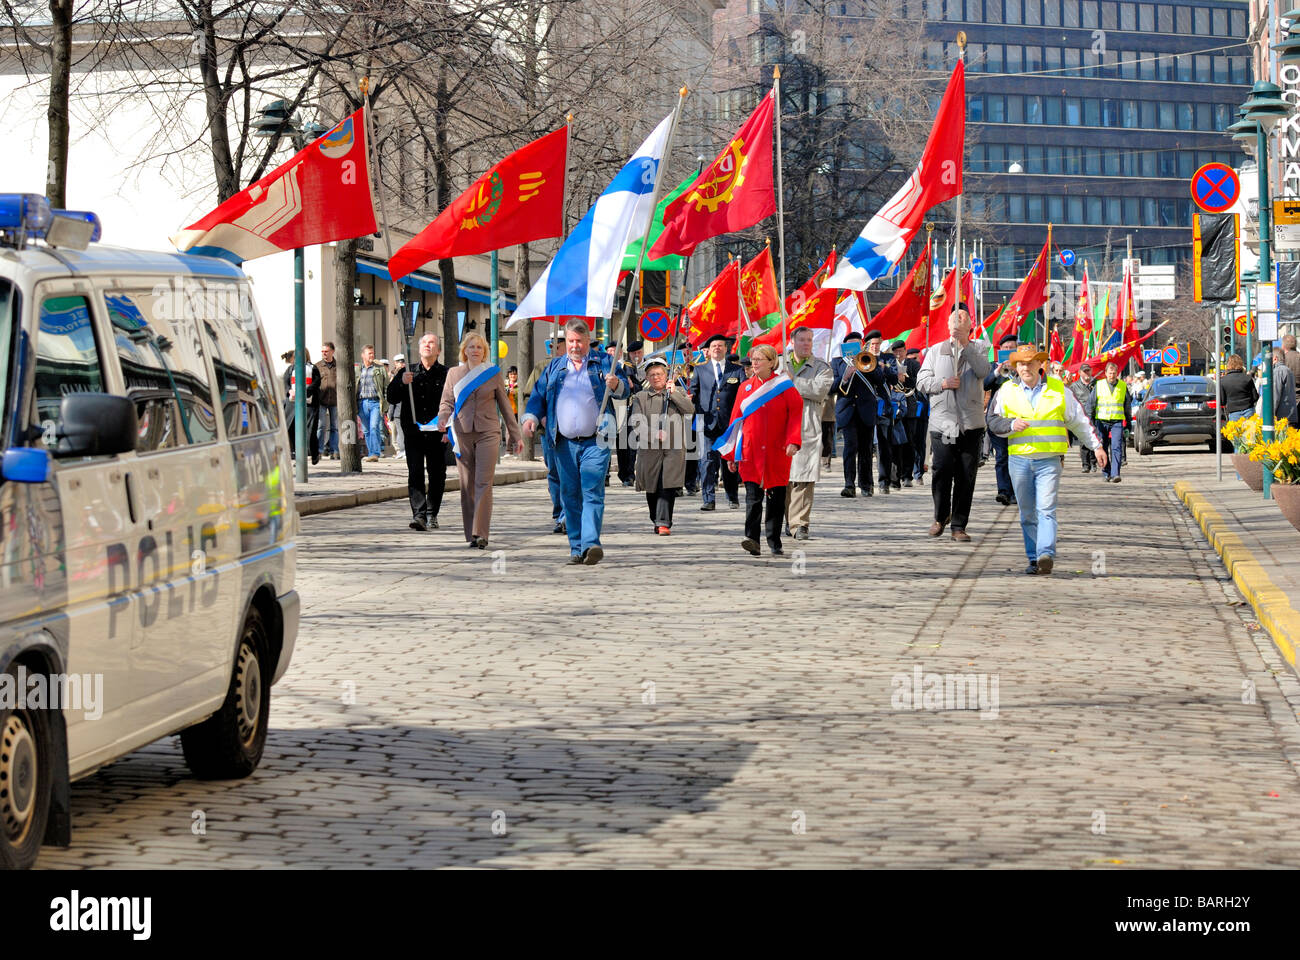 The Finnish labour union, SAK, May Day parade with the red union flag at the Esplanade. Helsinki, Finland, Scandinavia, Europe. Stock Photo